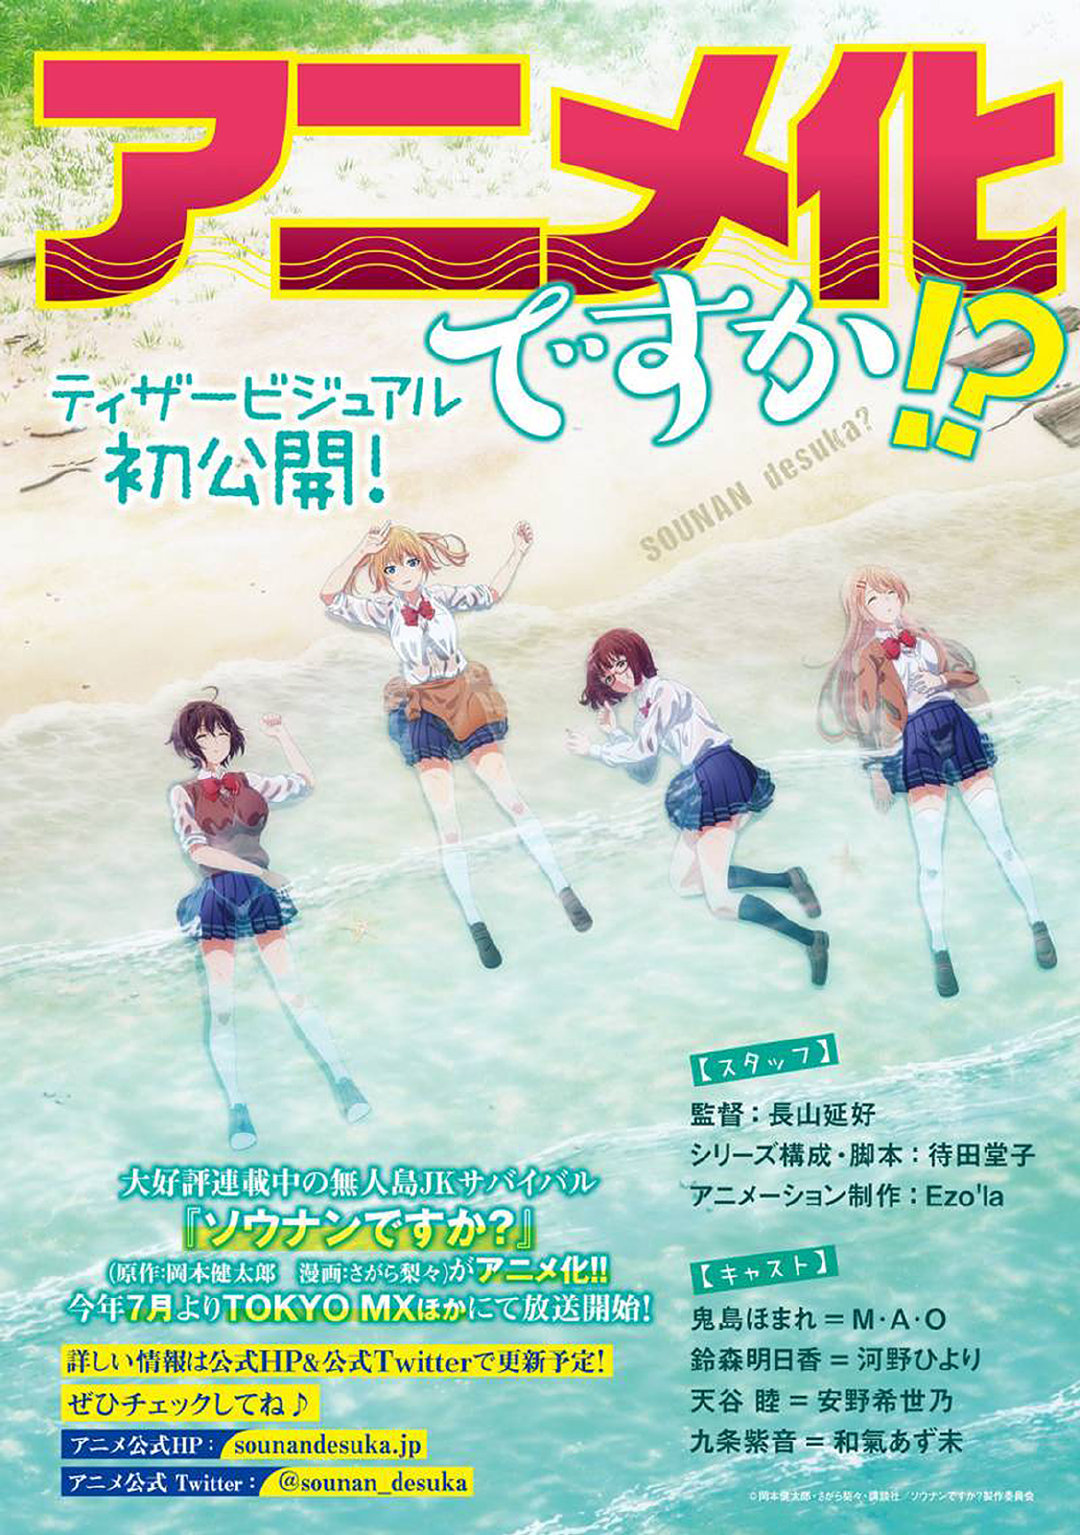 Kentarou Okamotoâ��s manga series â��Sounan desu ka?â�� will be receiving an anime adaptation. It will air in July 2019.
-Synopsis-â��â��Four girls are stranded on a deserted island after surviving a plane crash. How can they survive?â�� â��
-Staff-â�¢ Director:...